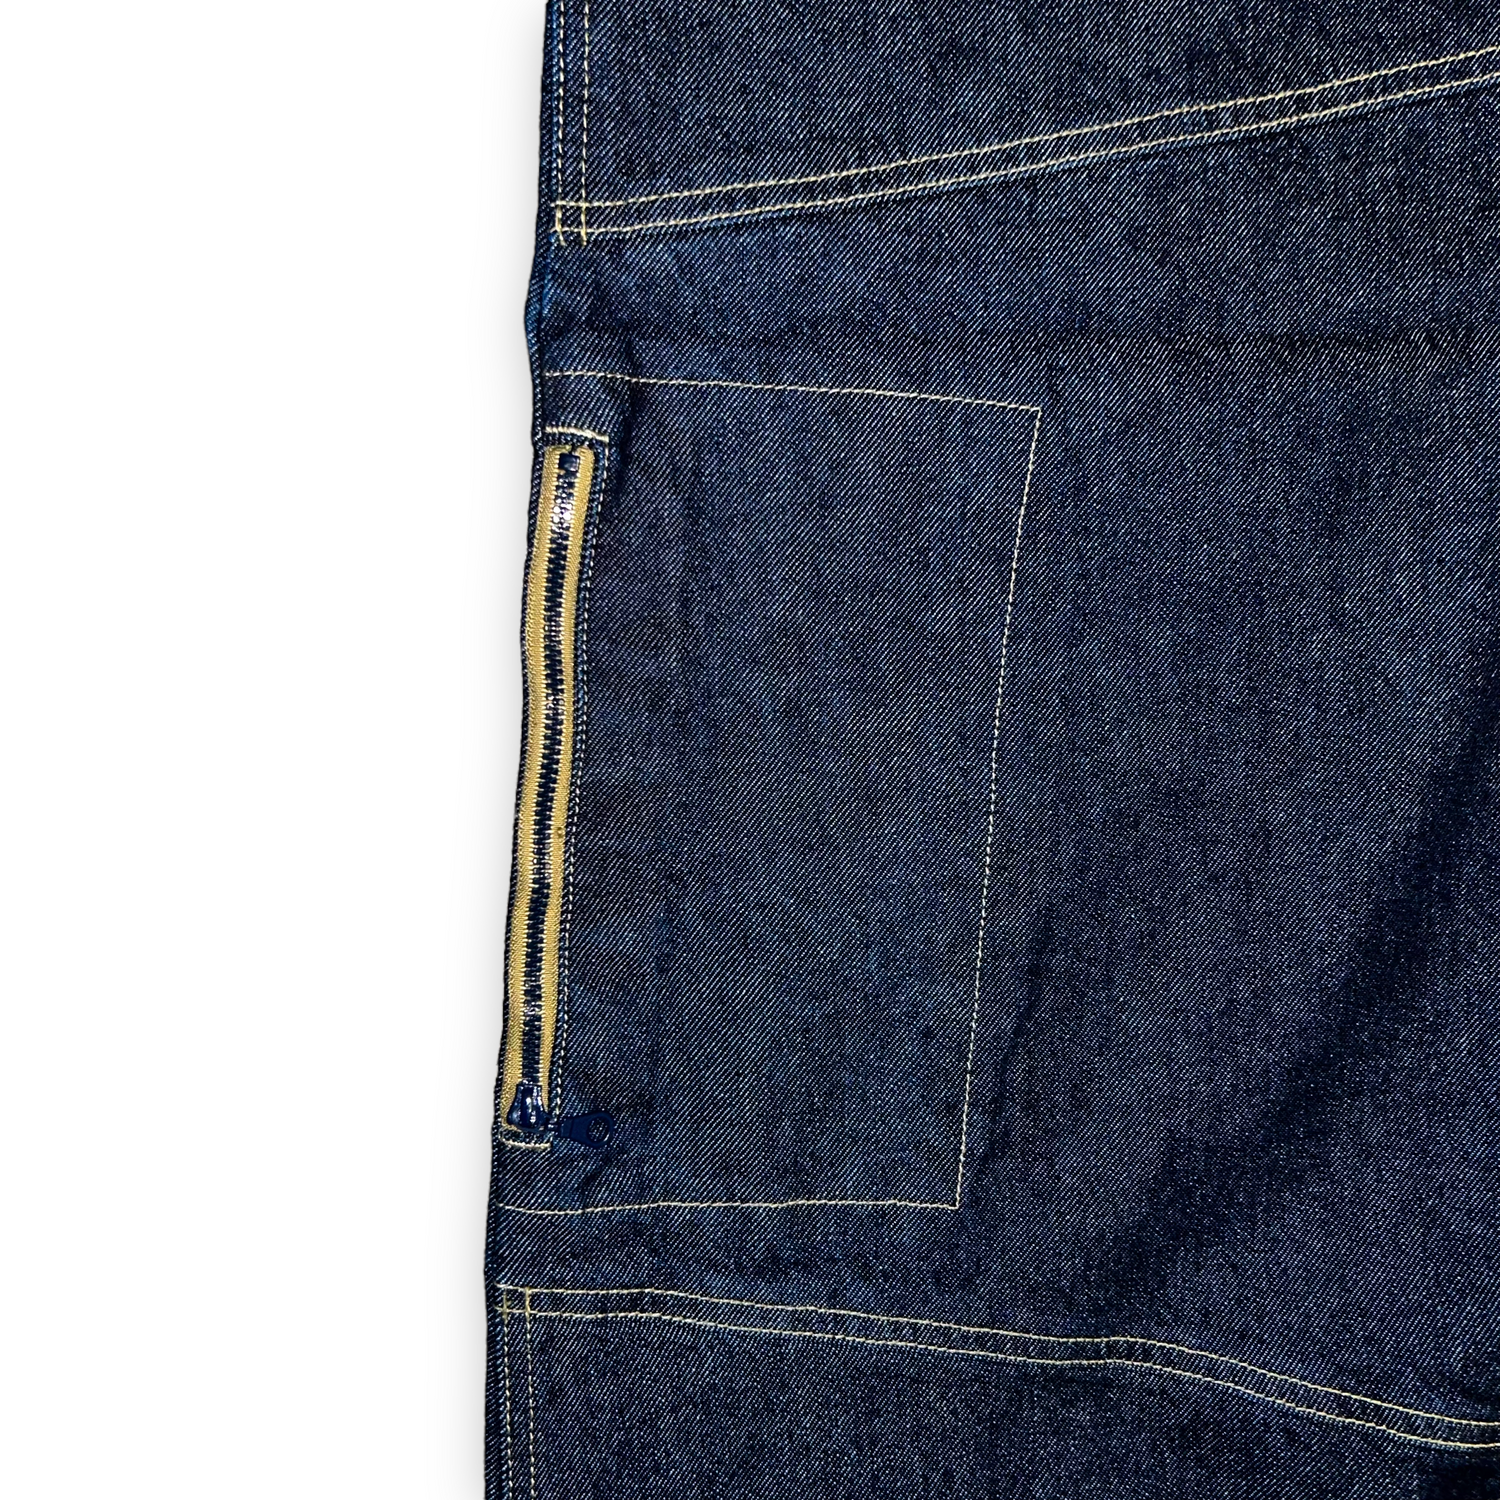 Baggy jeans Urban Expedition UBX vintage  (28 USA  XS)